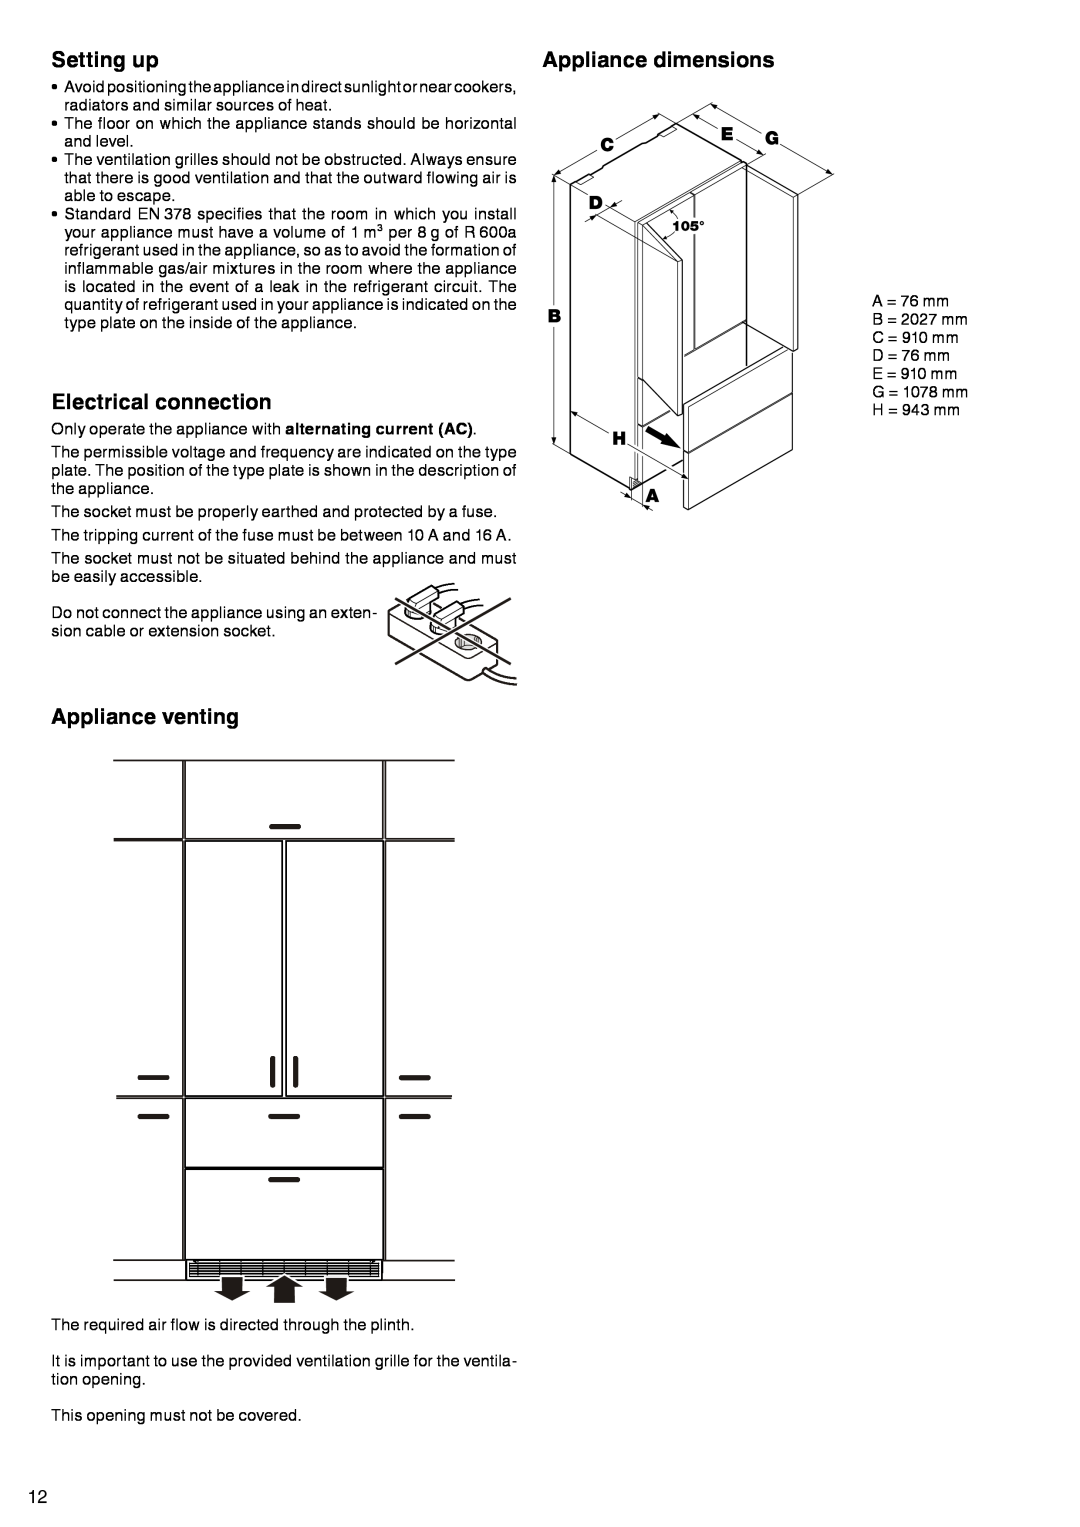 Liebherr liebherr manual Setting up, Appliance dimensions, Electrical connection, Appliance venting 